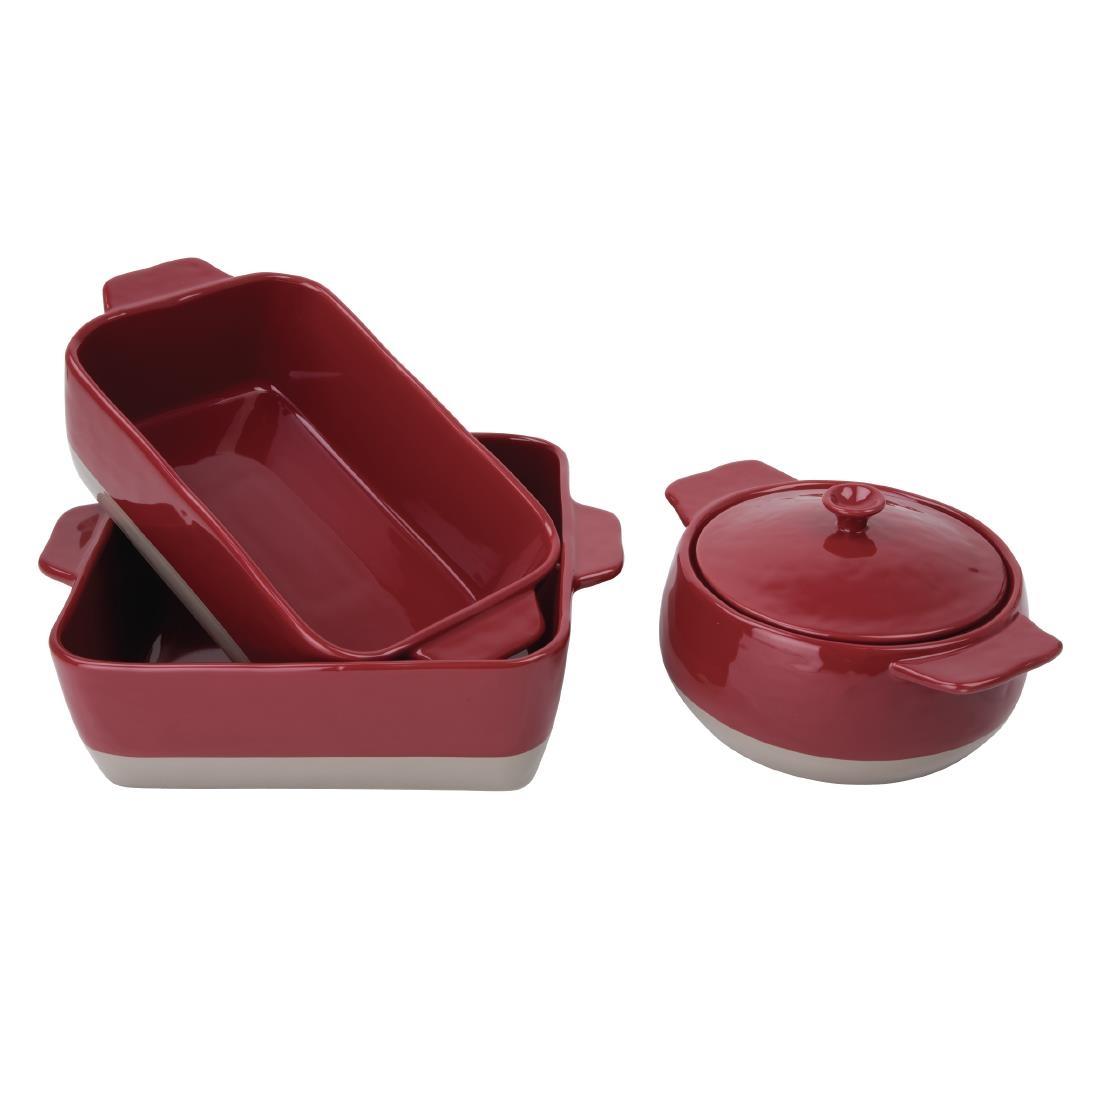 Olympia Red And Taupe Ceramic Roasting Dish - DB522  - 3